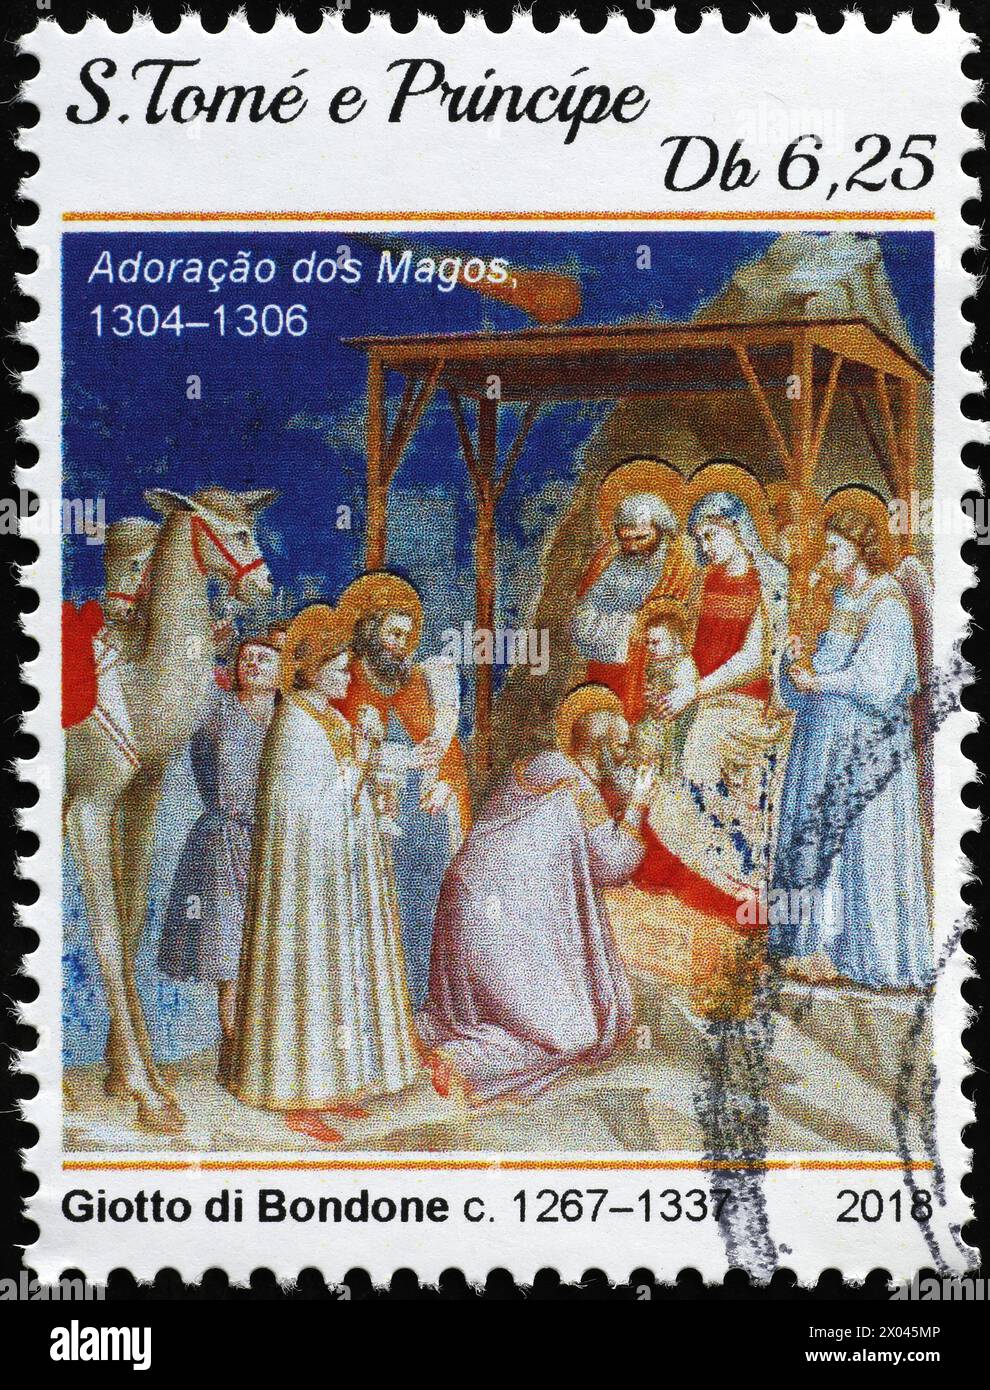 Adoration of the Magi by Giotto on postage stamp Stock Photo